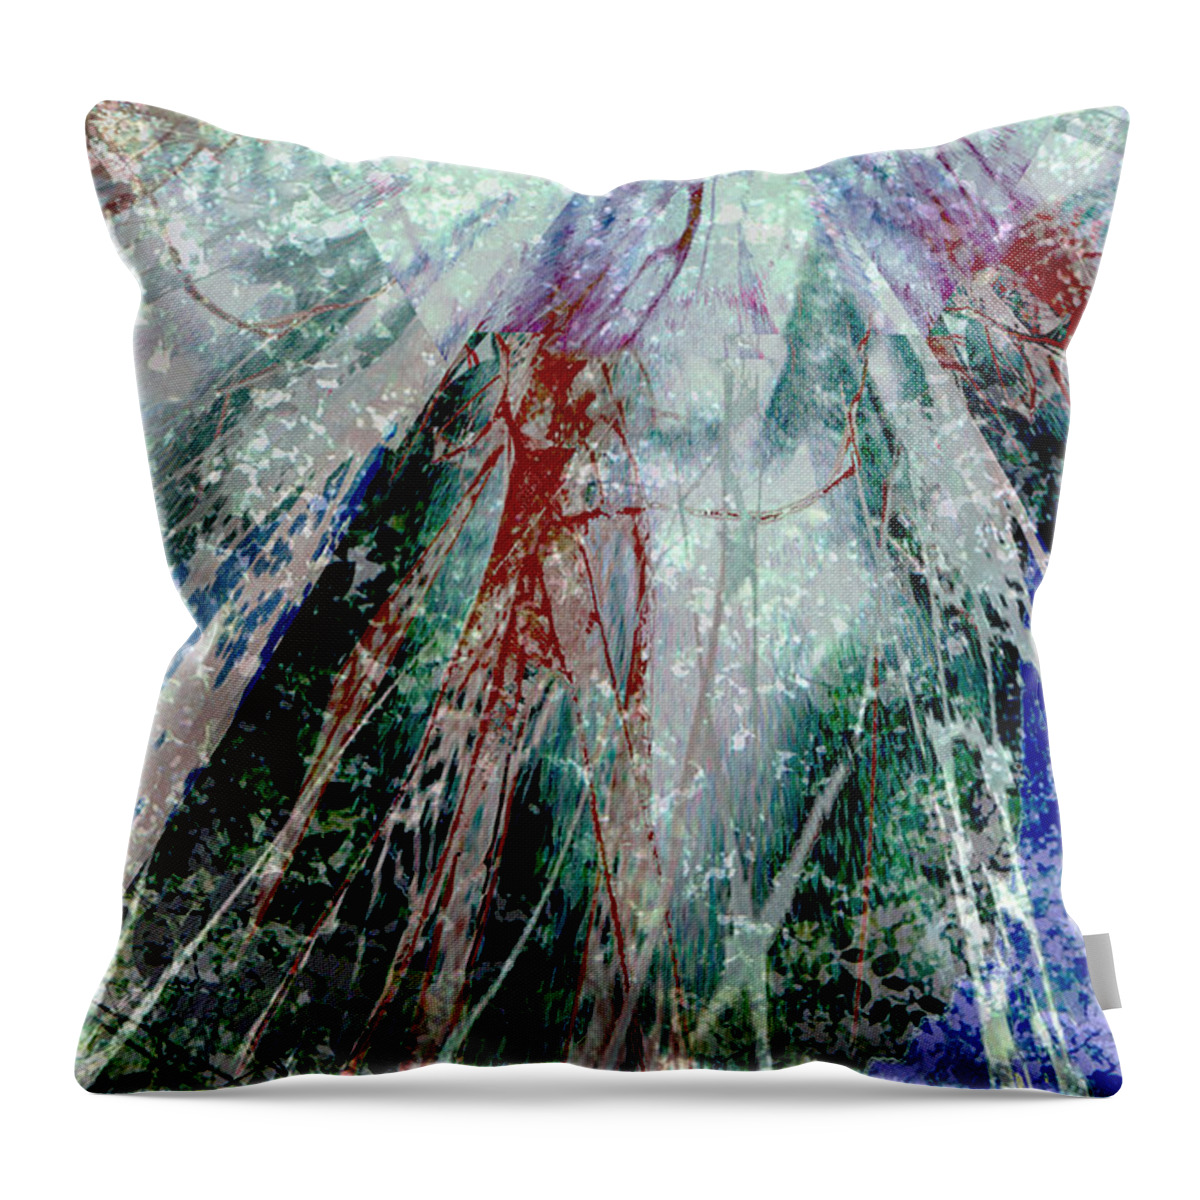 Amid The Falling Snow Throw Pillow featuring the digital art Amid the Falling Snow by Seth Weaver